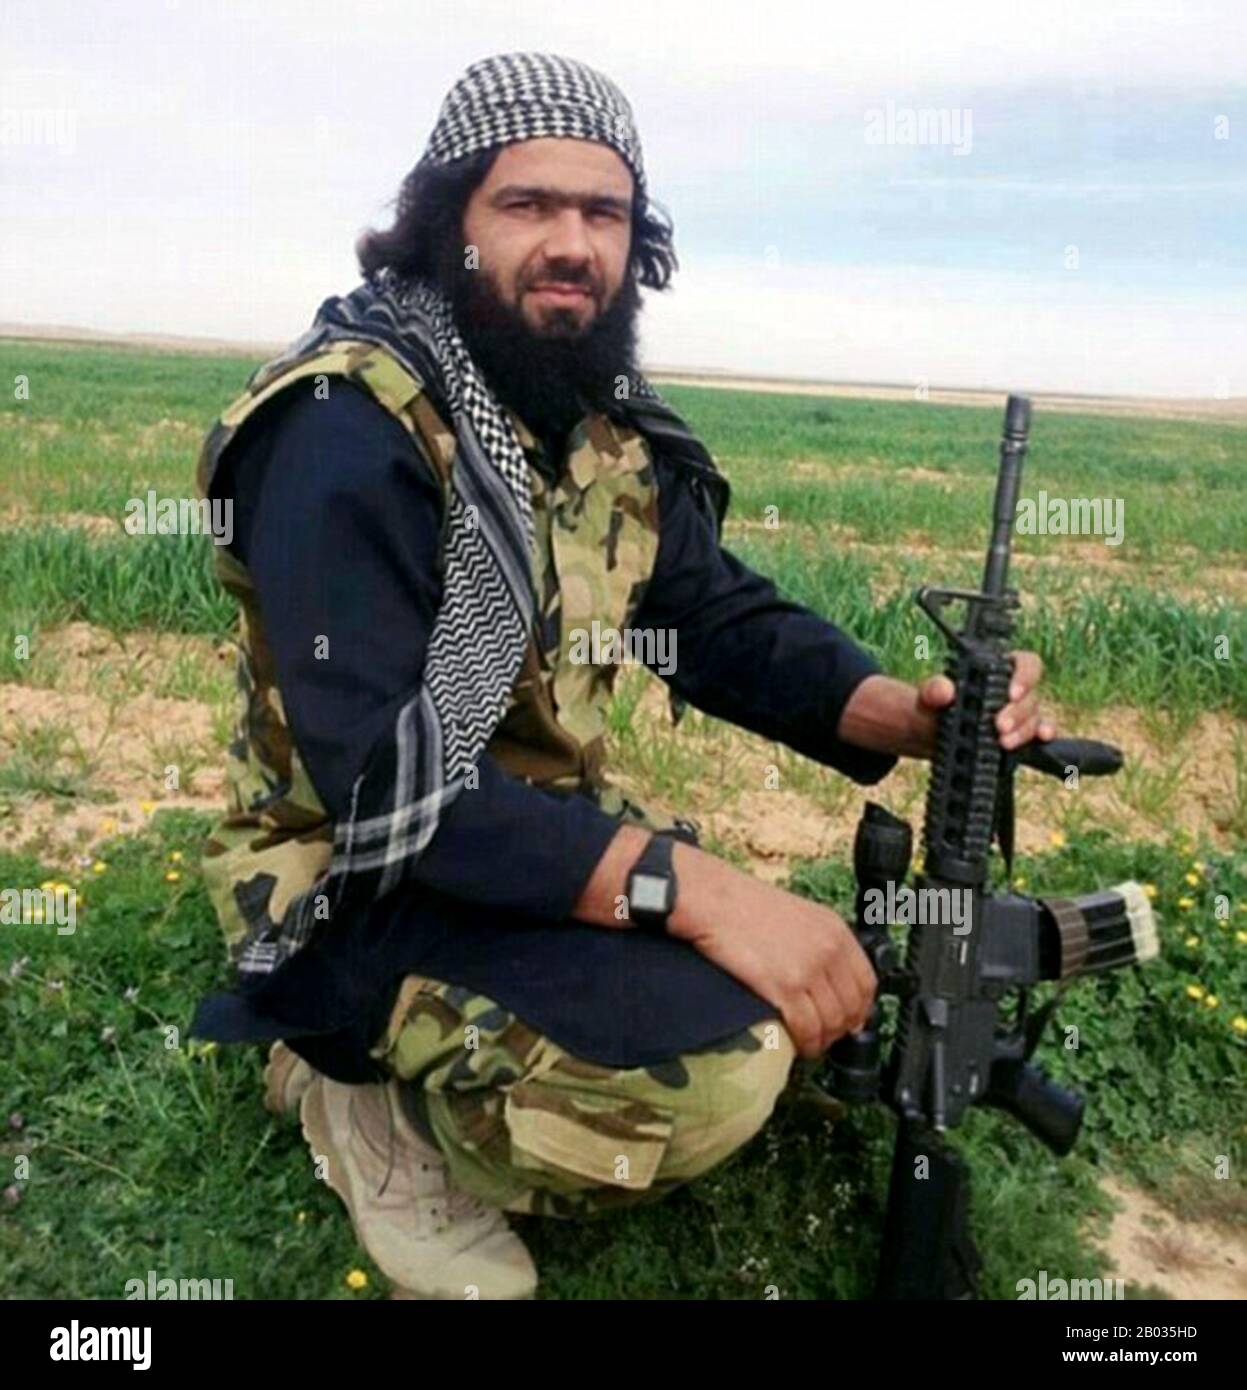 Shaker Wahib al-Fahdawi al-Dulaimi (1986 – May 6, 2016), better known as Abu Waheeb ('Father of the Generous'), was a leader of the militant group Islamic State in Iraq and the Levant in Anbar, Iraq.  He was known for the execution of three Syrian Alawite truck drivers in Iraq in the summer of 2013, as head of the Al Anbar Lions. He and three others were killed in a United States-led coalition airstrike in May 2016, according to the US Department of Defense. Stock Photo